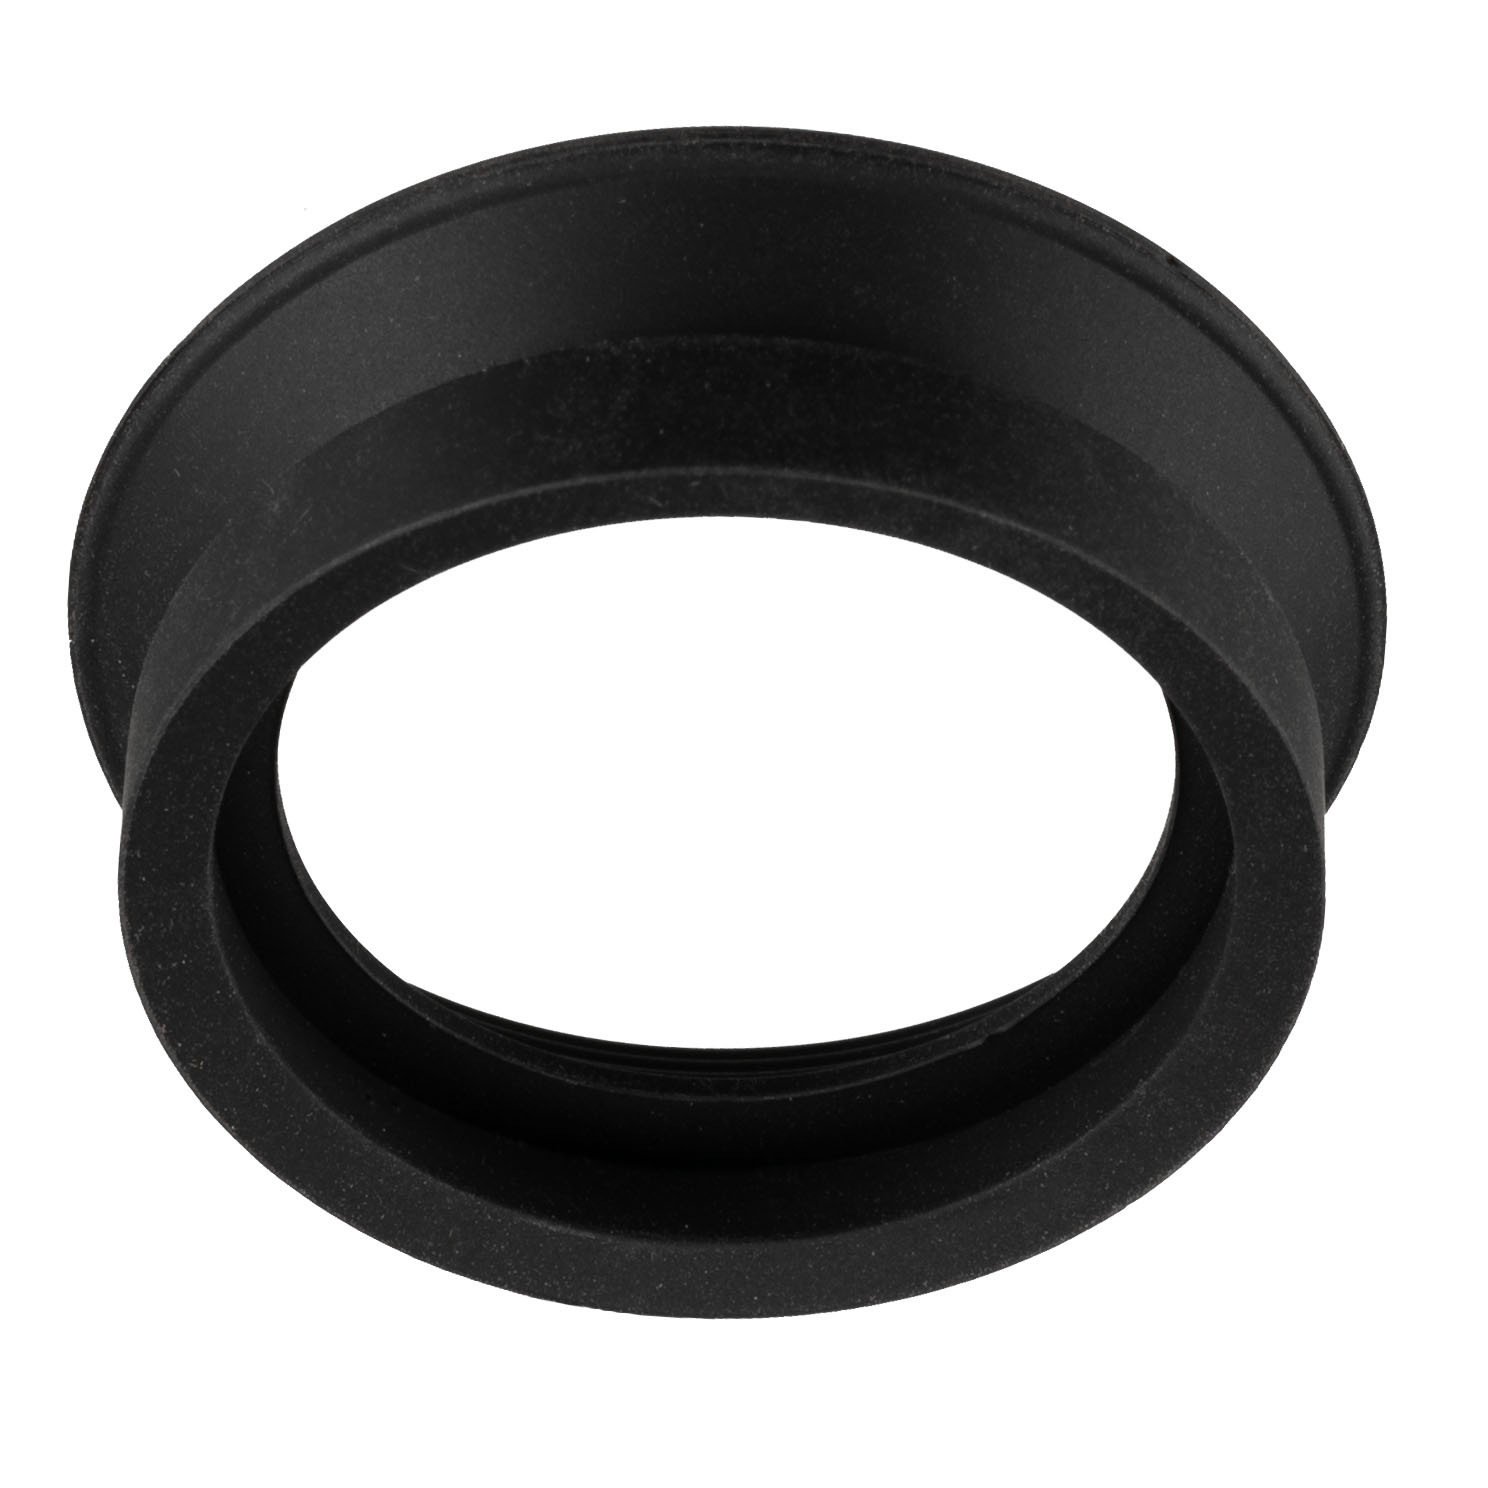 Silicone Eye Cup Diameter 43mm for ES Eyepieces